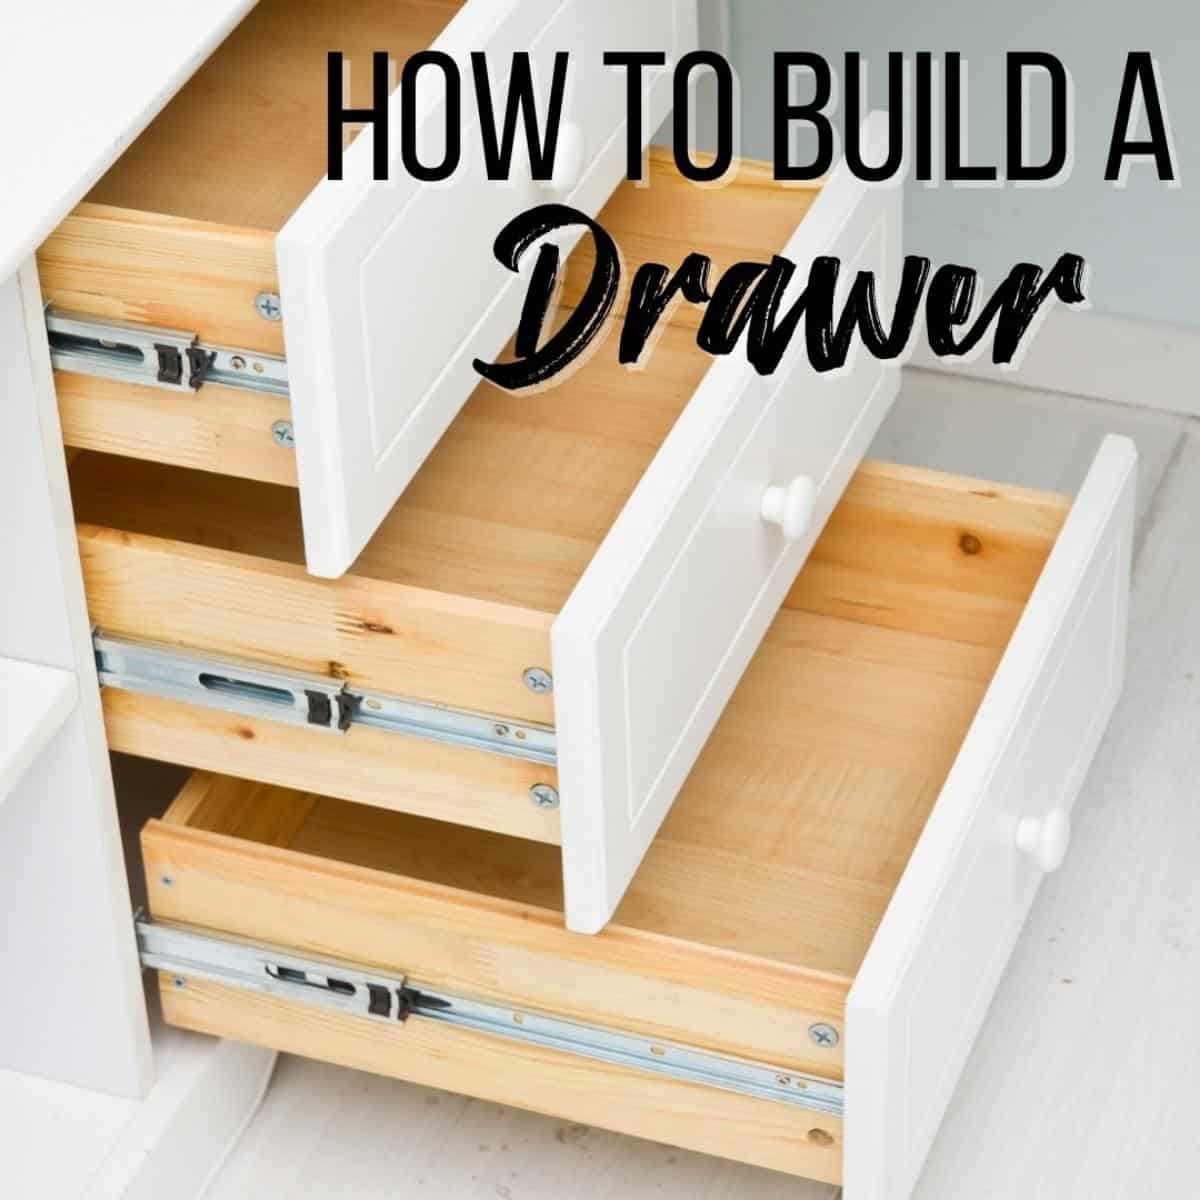 https://www.thehandymansdaughter.com/wp-content/uploads/2021/10/how-to-build-a-drawer-featured-image.jpeg